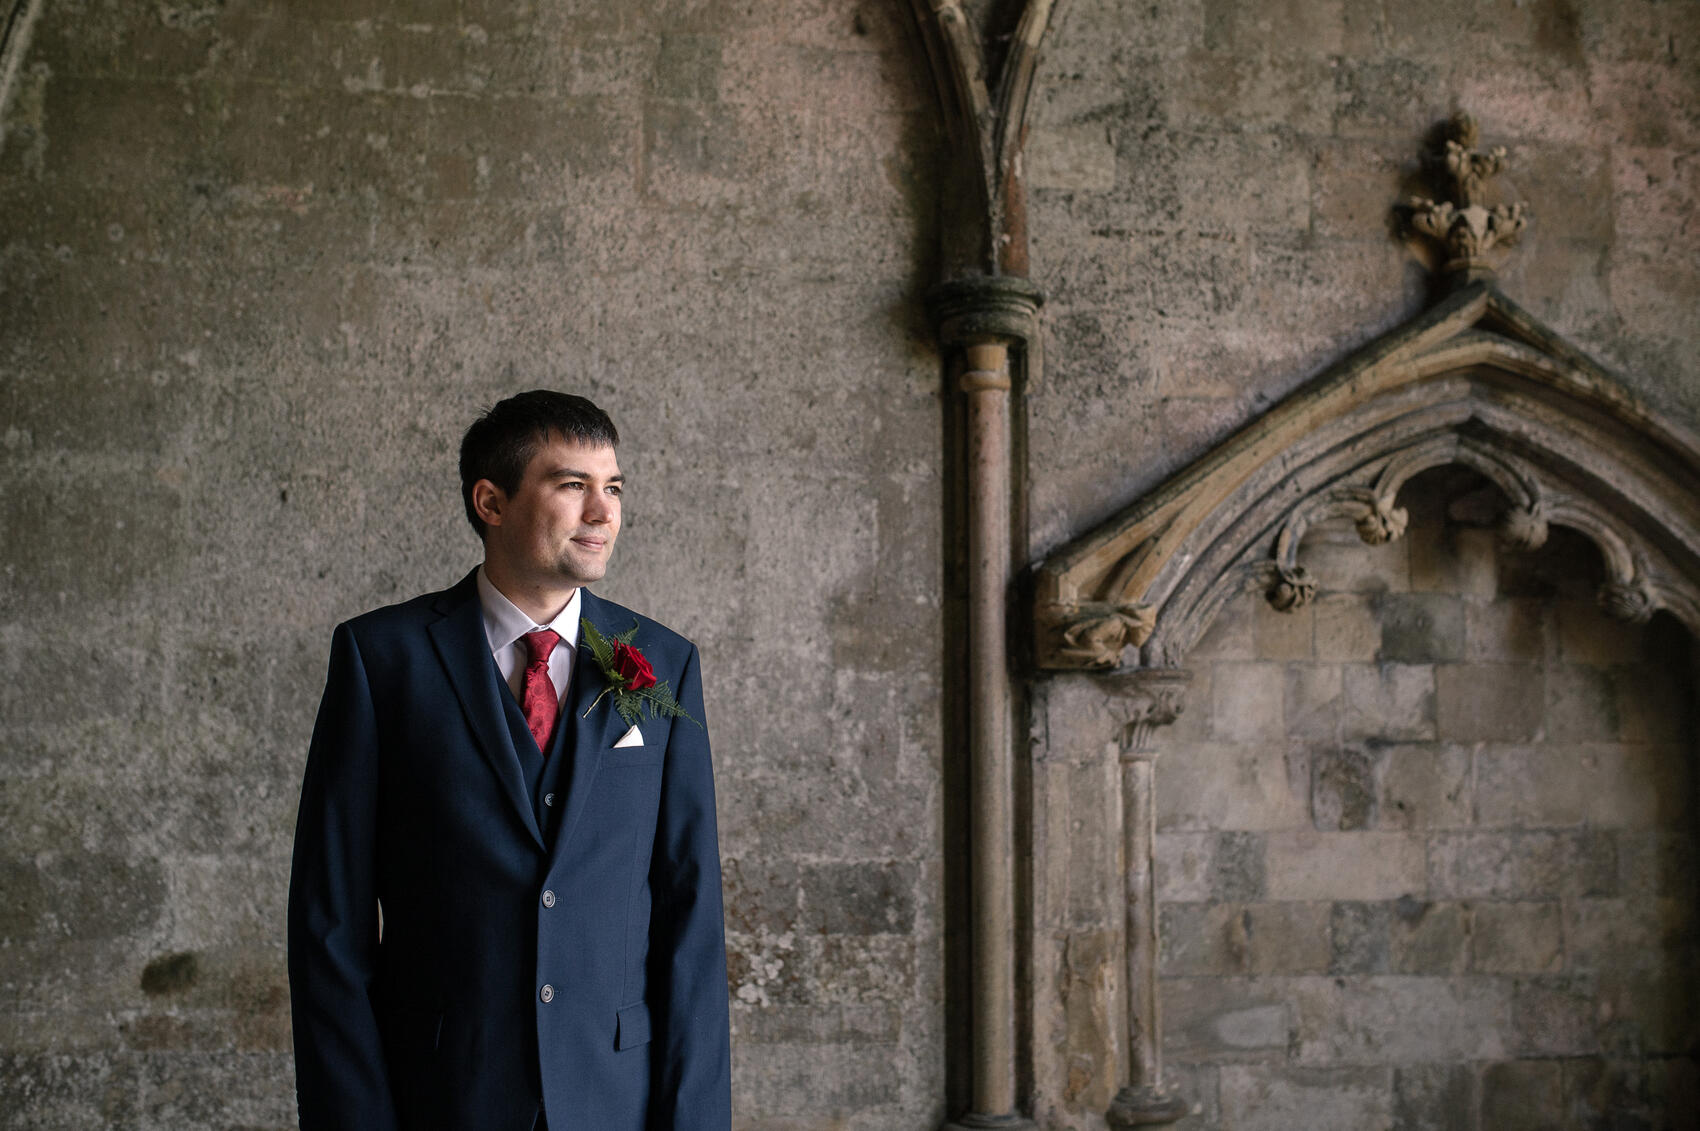 Groom waiting for the bride in doorway of Christchurch Priory wedding ceremony